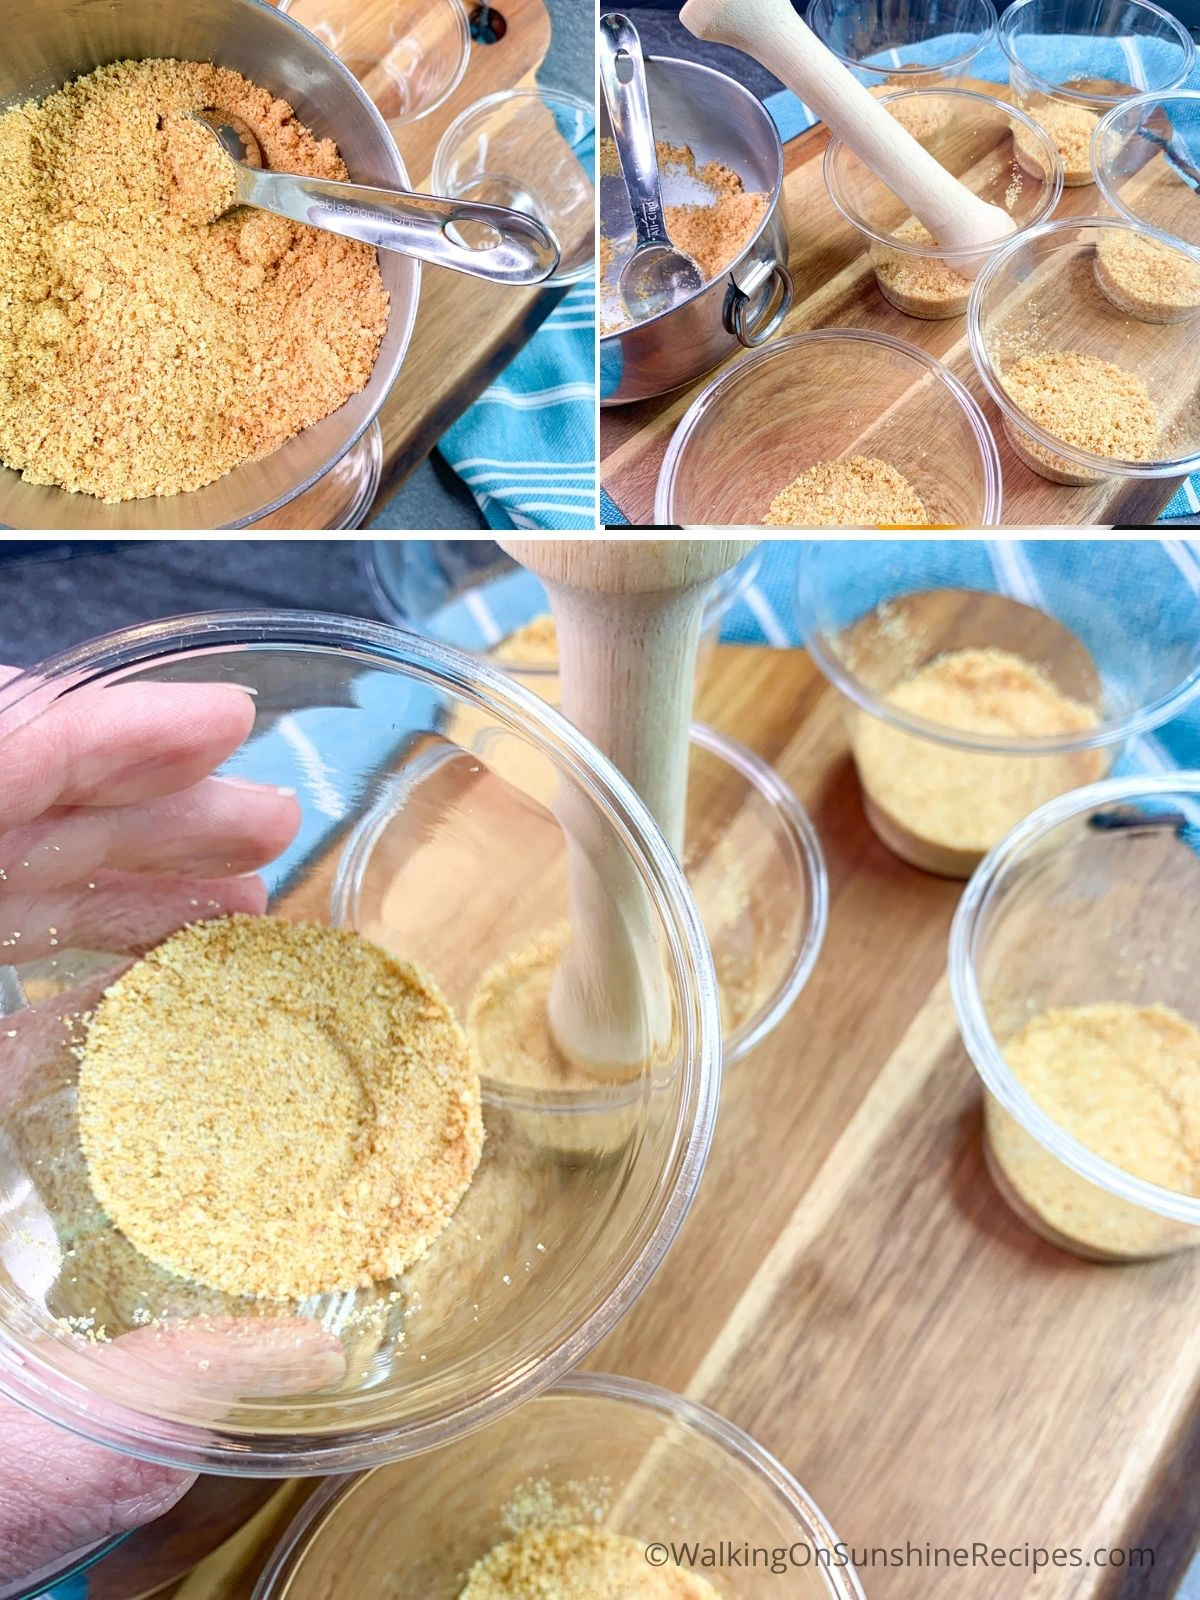 Add crushed graham crackers to small cups.